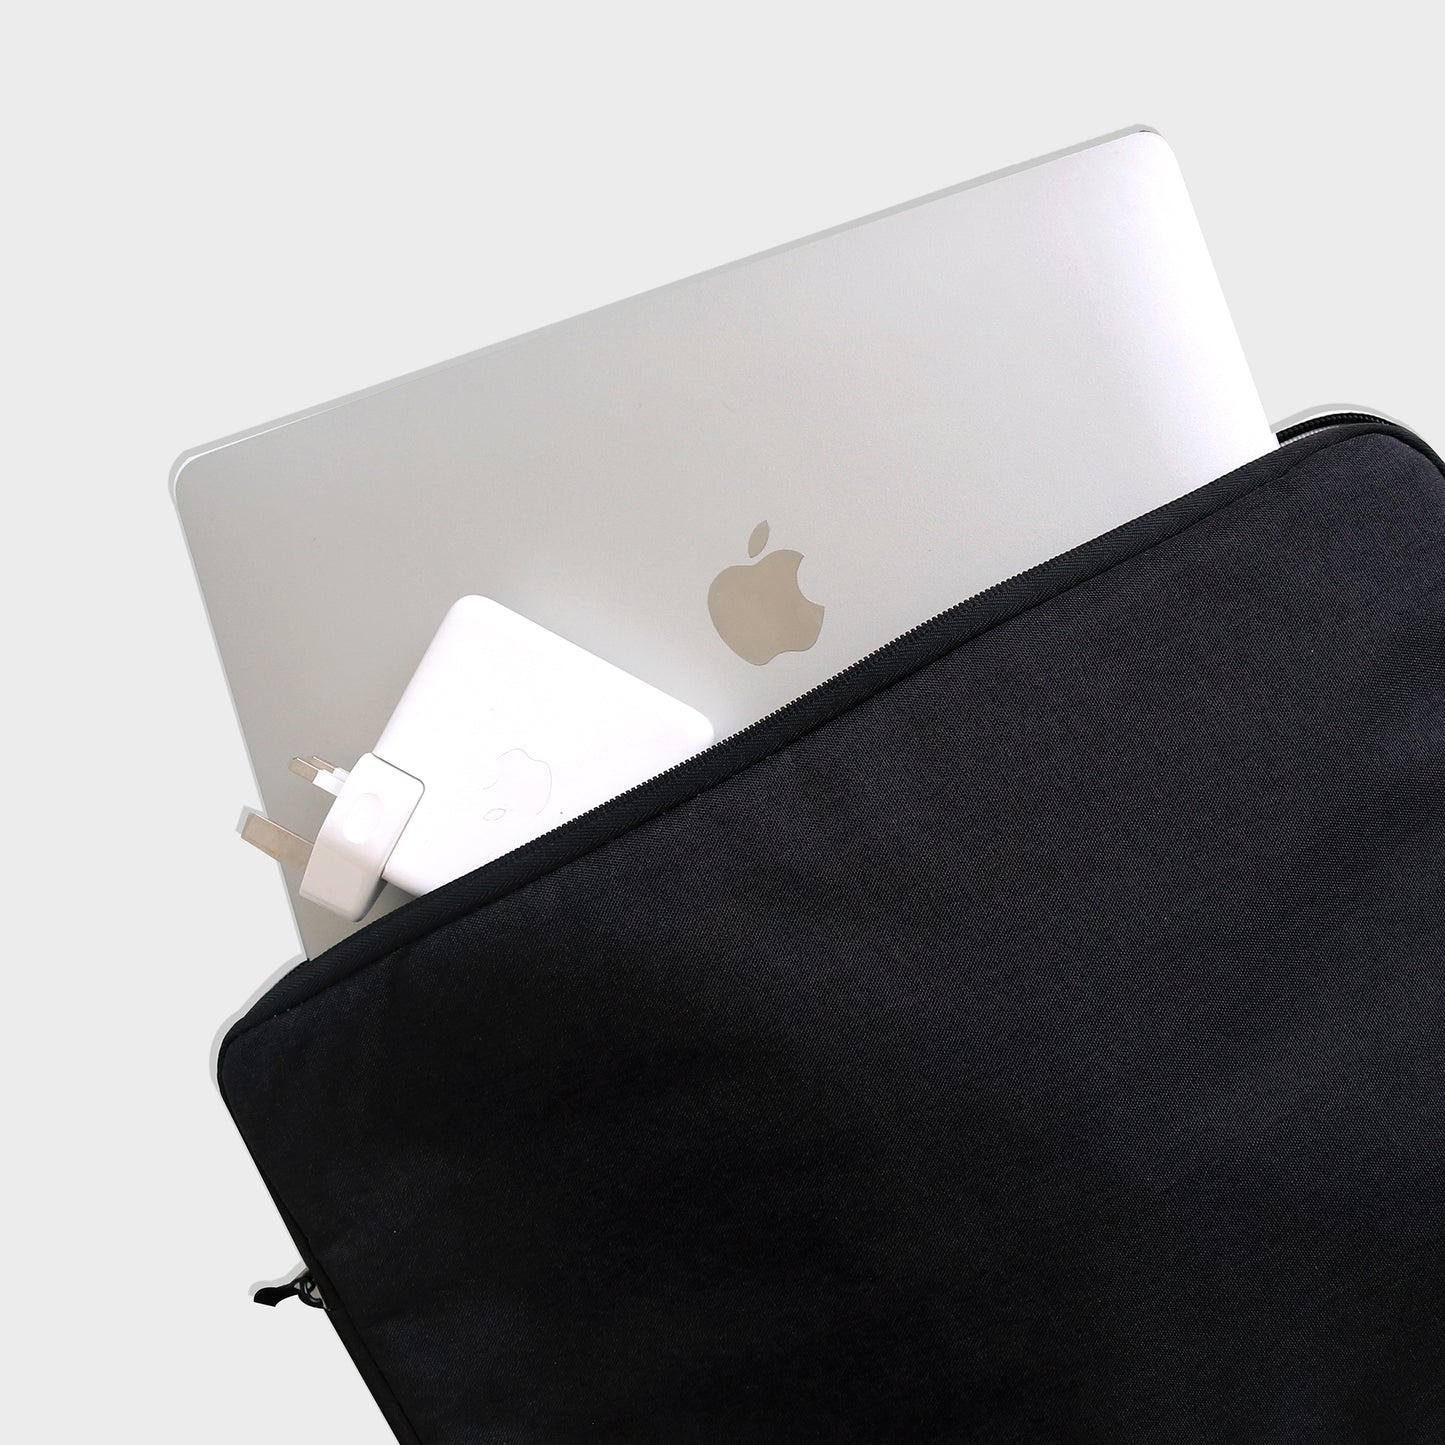 Universal Laptop Pouch - You Are The Best 1.0